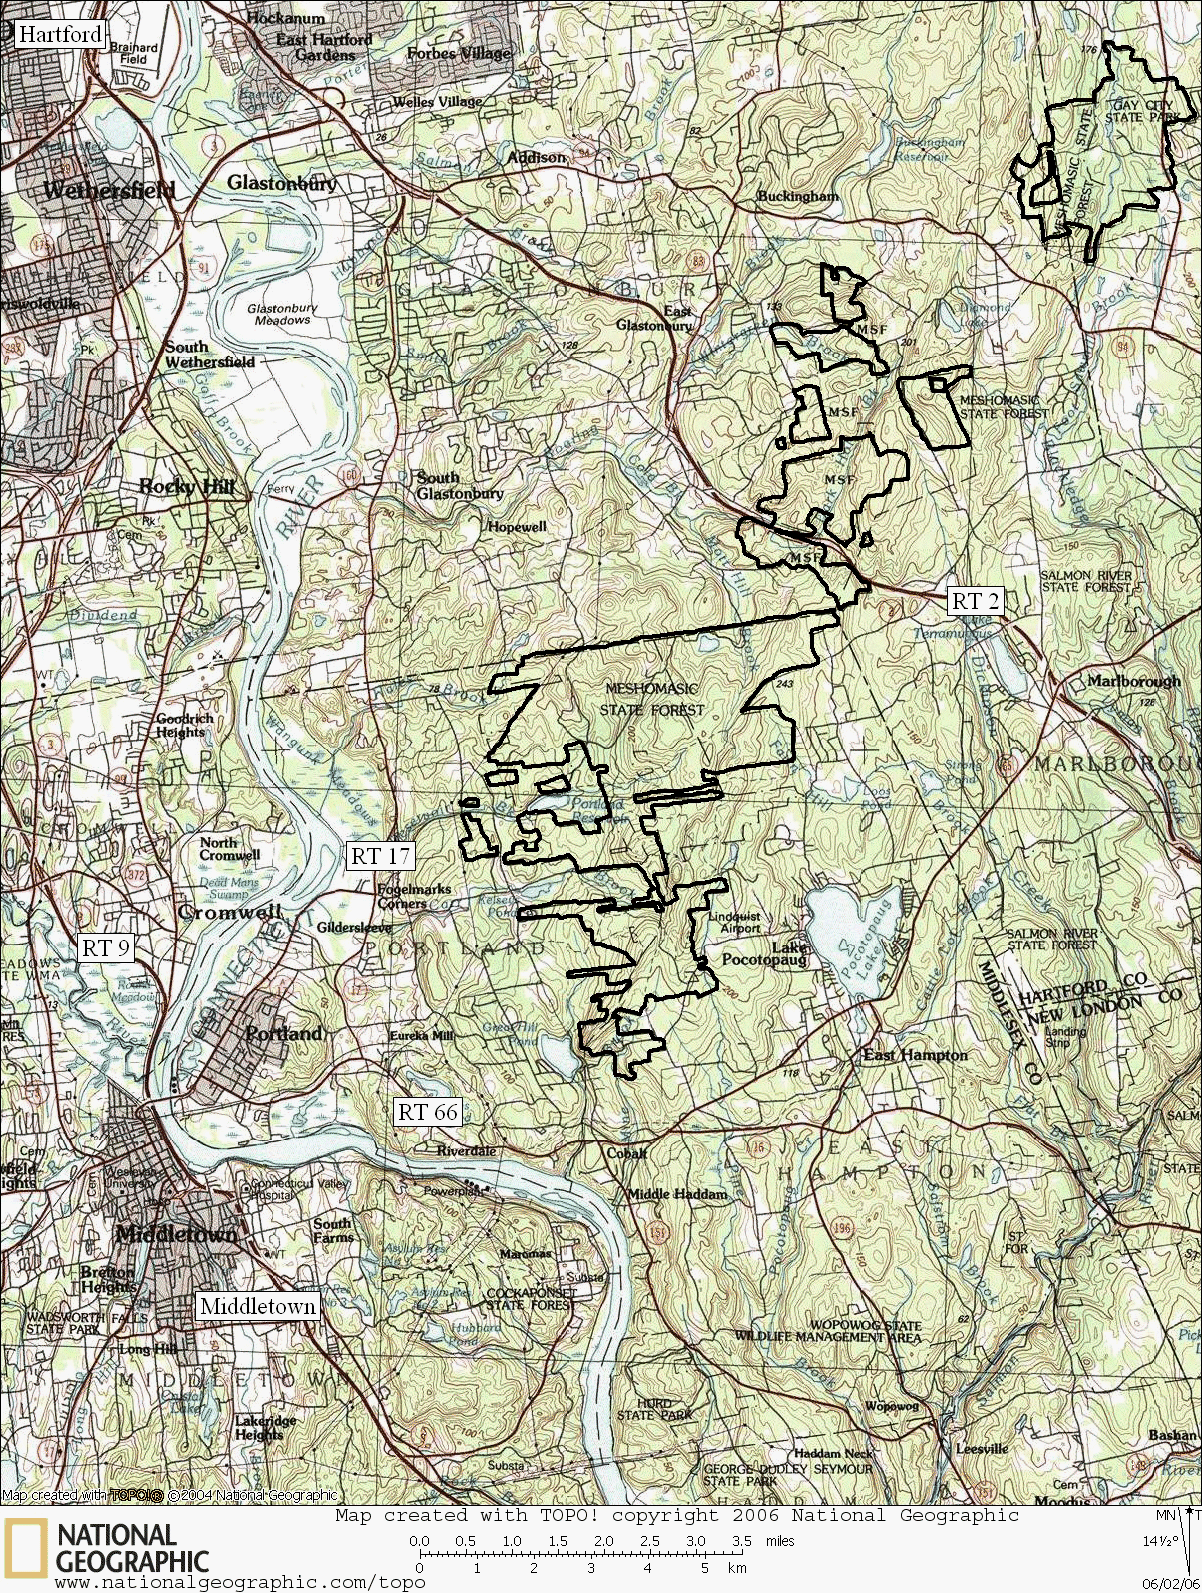 Meshomasic State Forest Hiking Trail Map